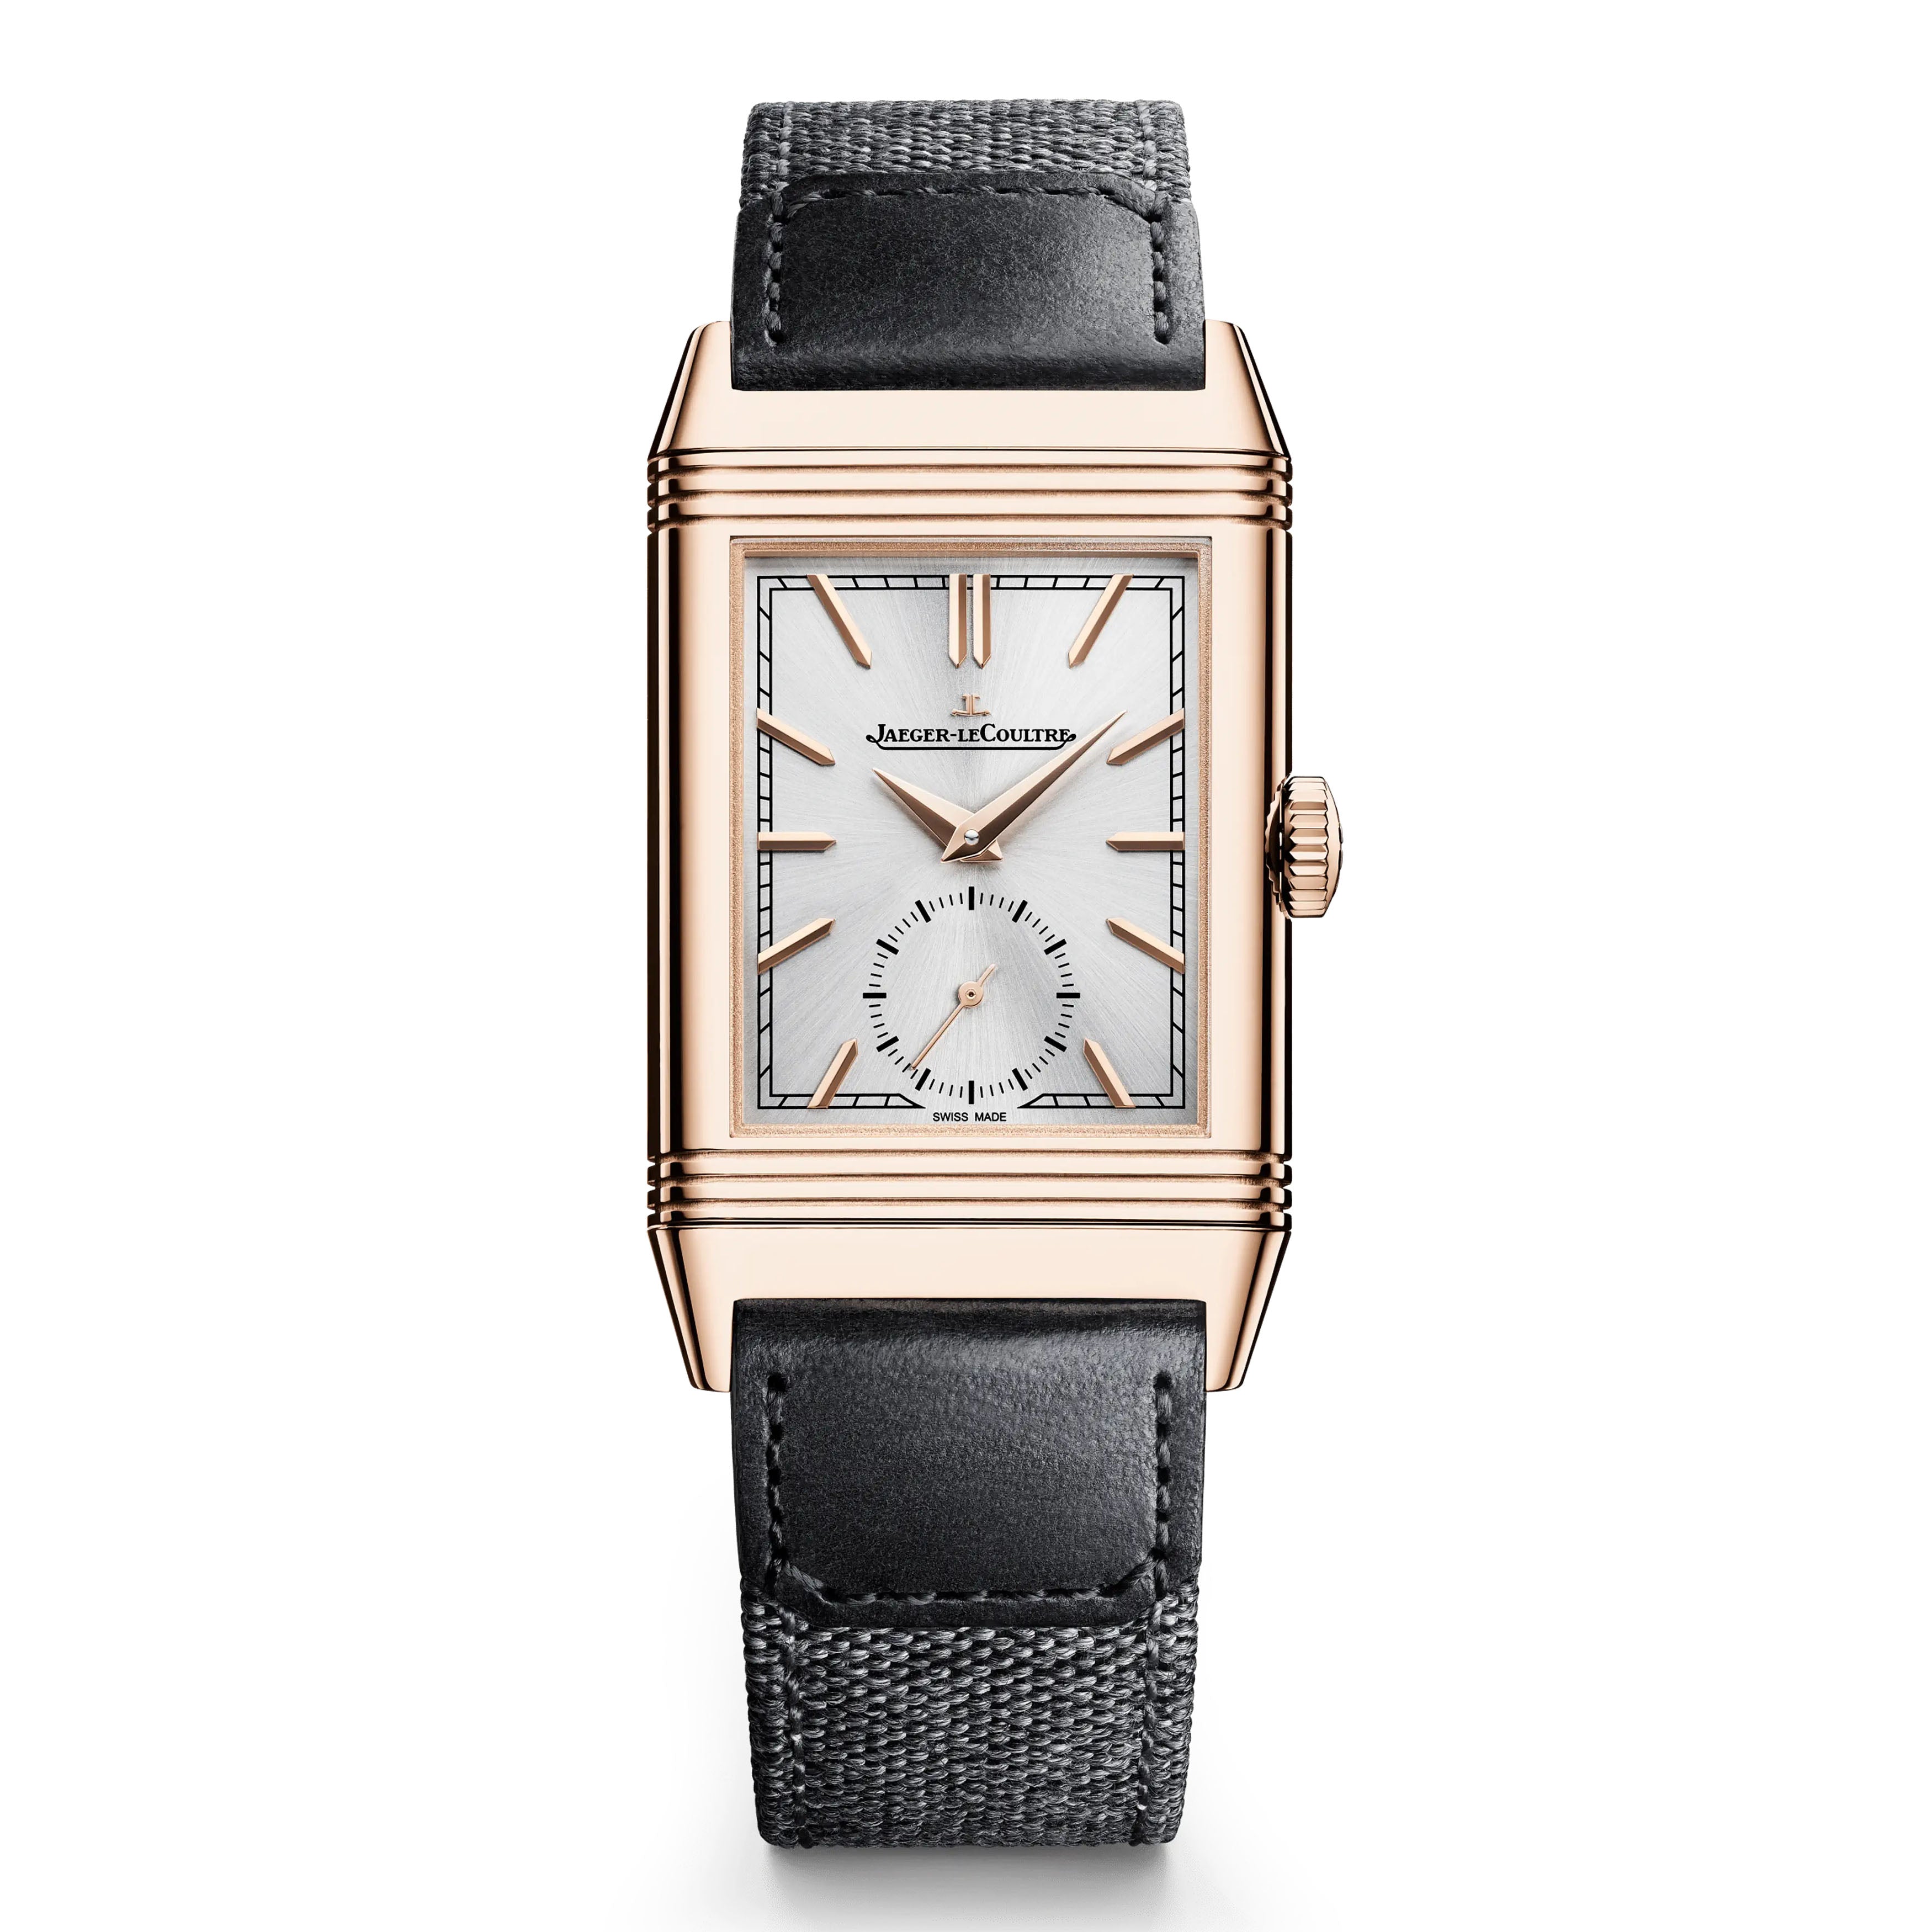 Jaeger-LeCoultre Reverso Tribute Small Seconds Watch, 45.6mm Silver Dial, Q7132521